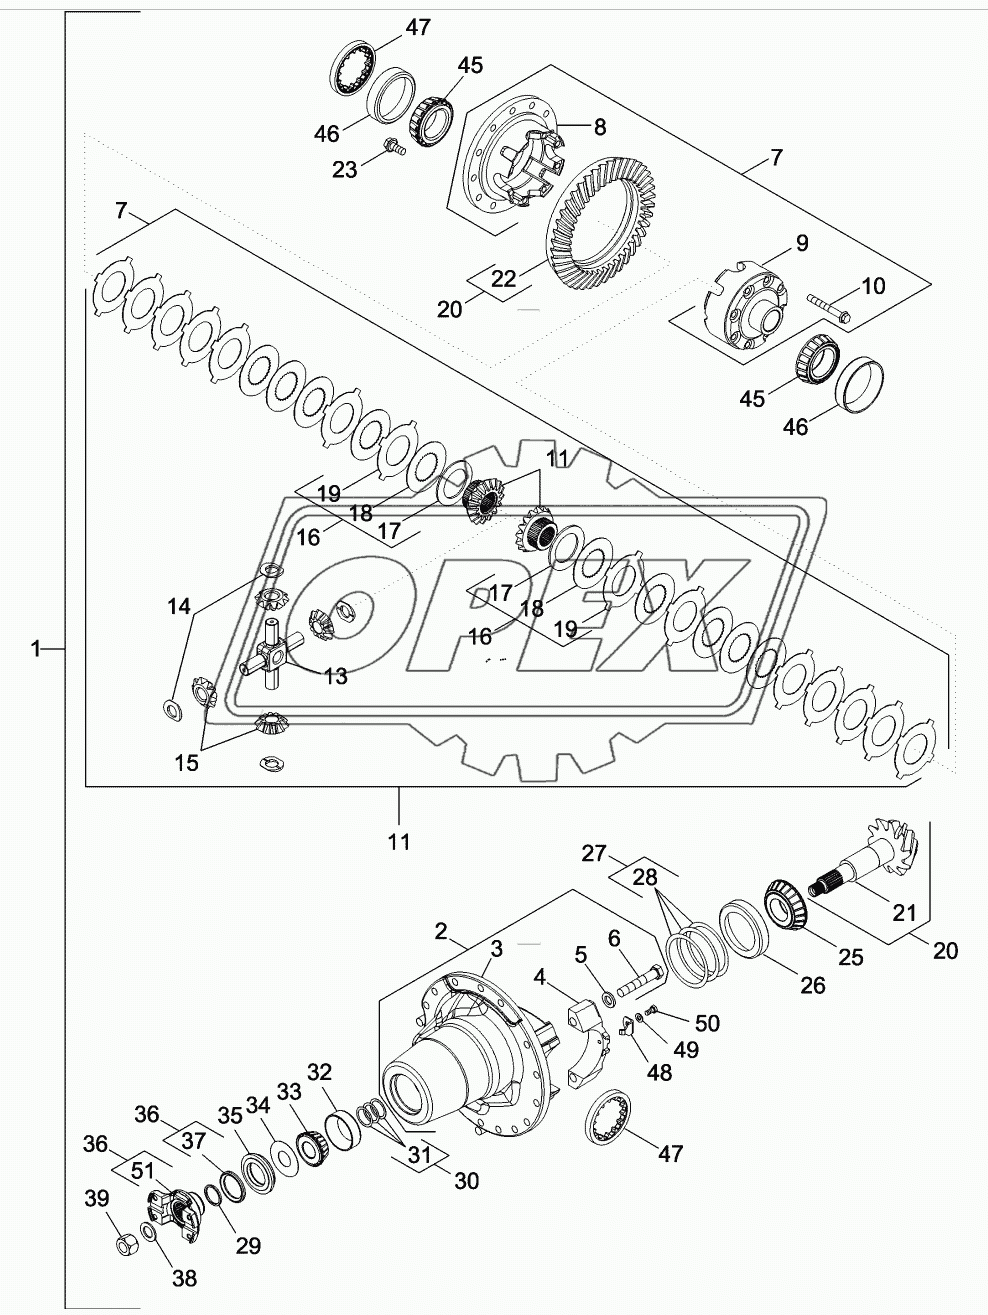 CARRIER AND DIFFERENTIAL - MFD, 12 BOLT HUB, WITHOUT DIFFERENTIAL LOCK